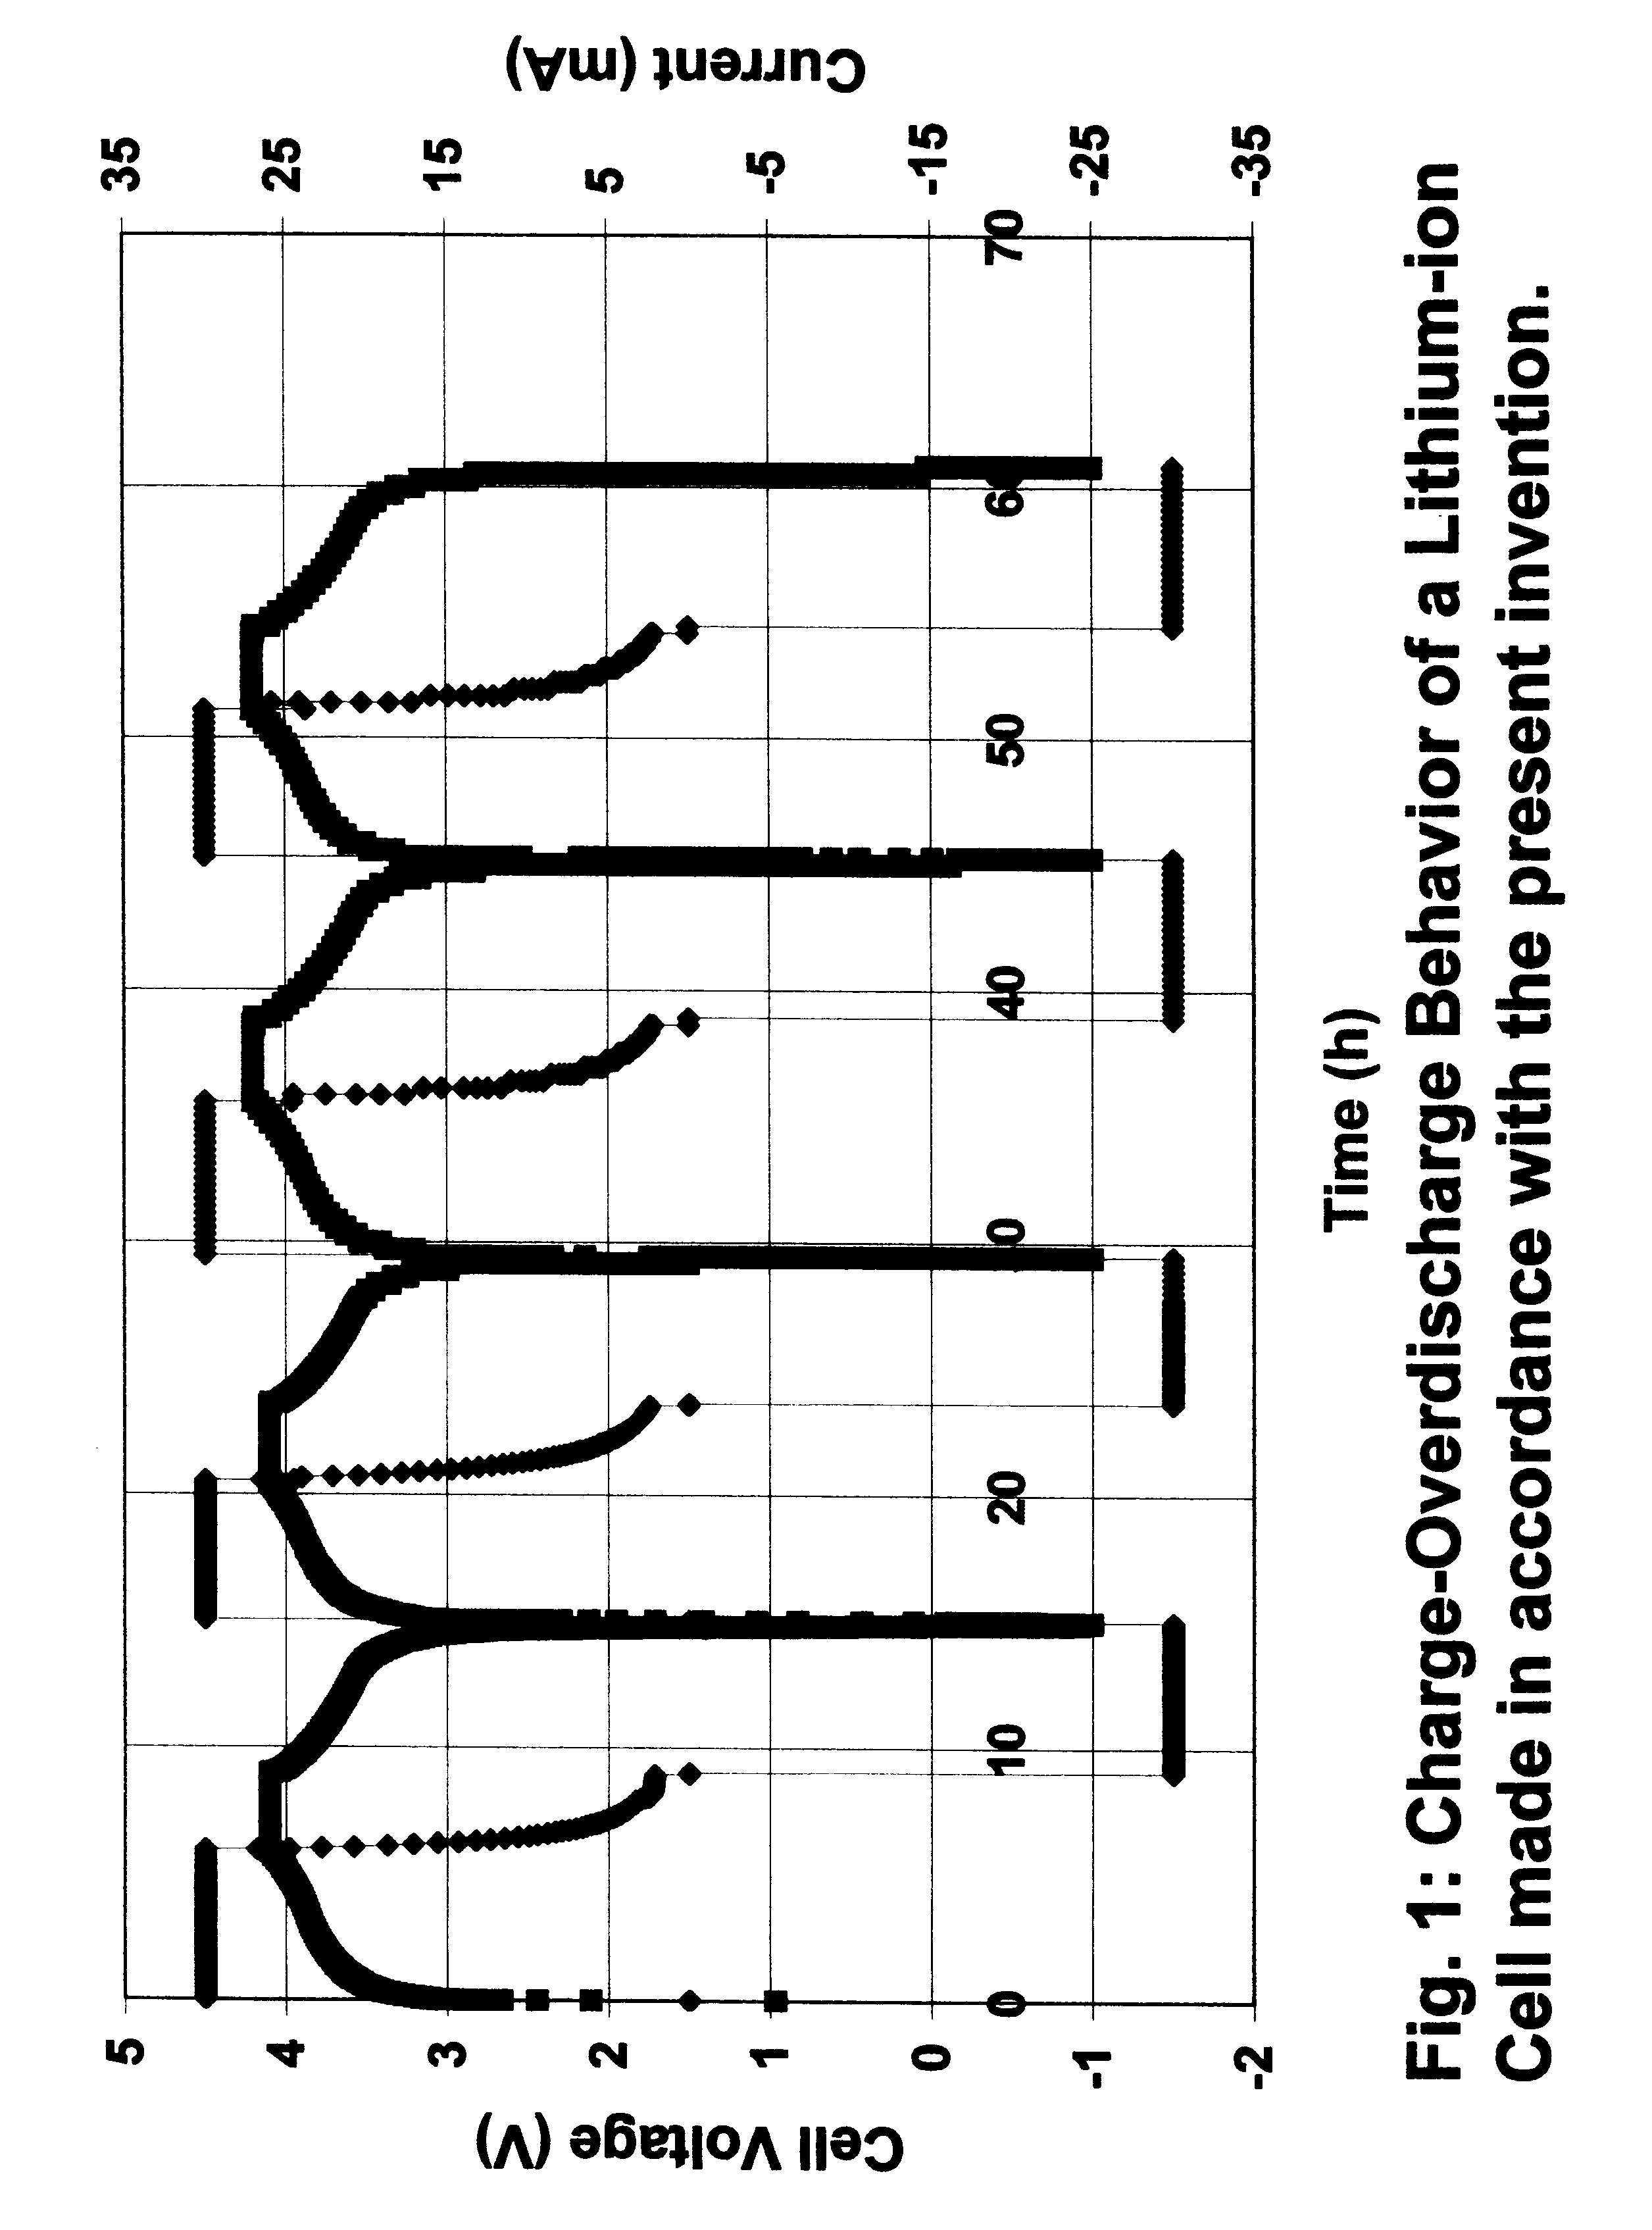 Secondary non-aquenous electrochemical cell configured to improve overcharge and overdischarge acceptance ability